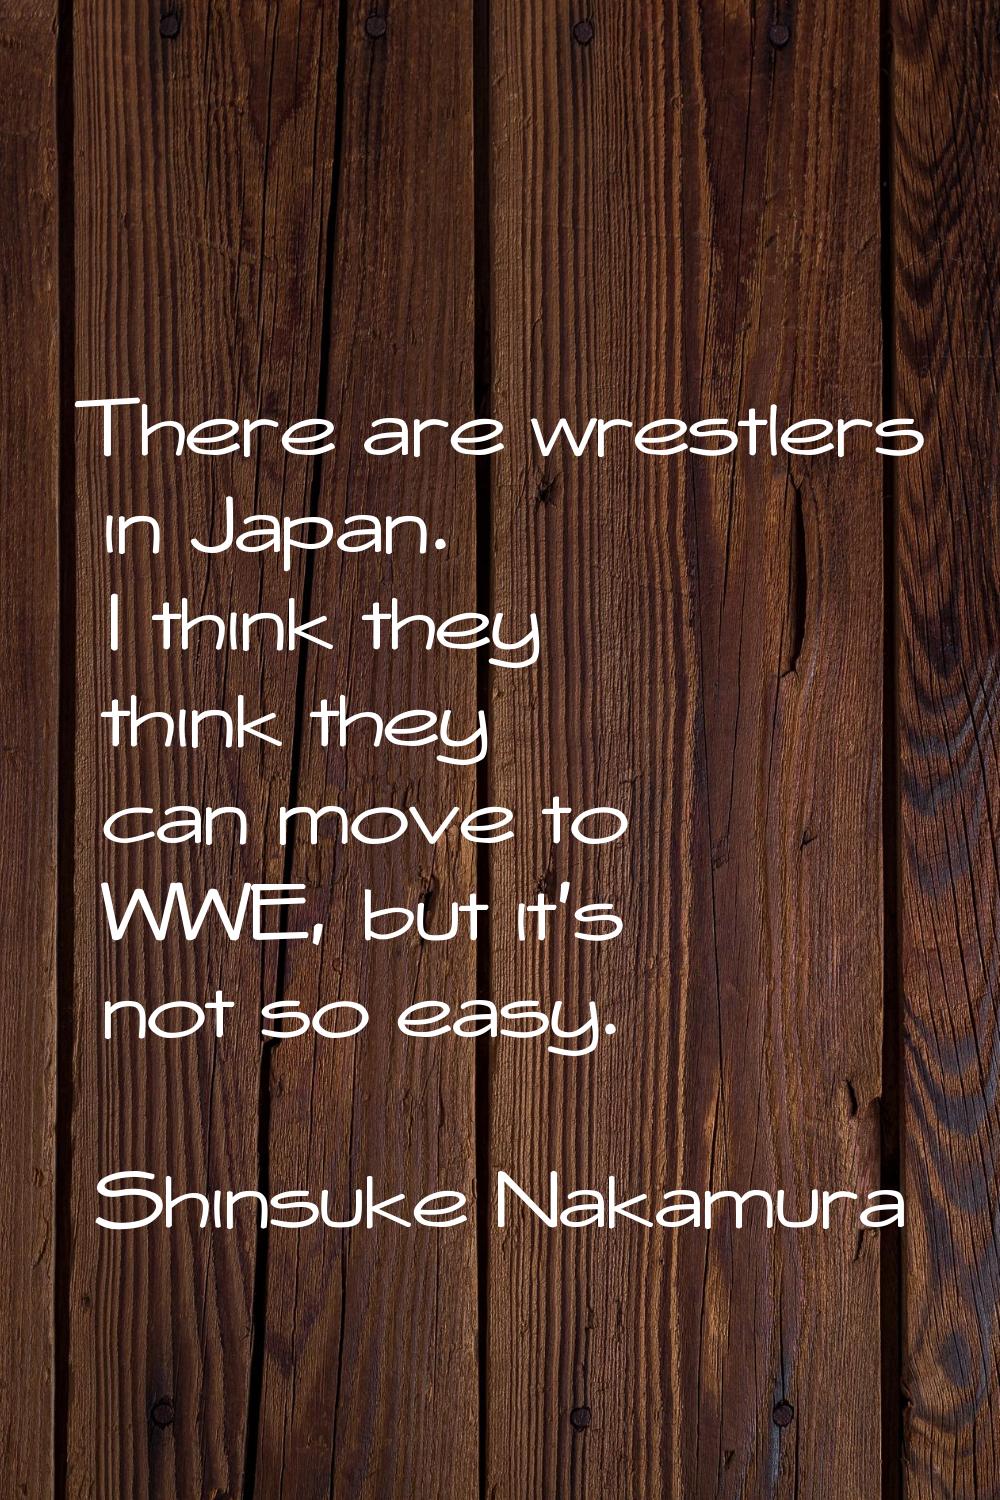 There are wrestlers in Japan. I think they think they can move to WWE, but it's not so easy.